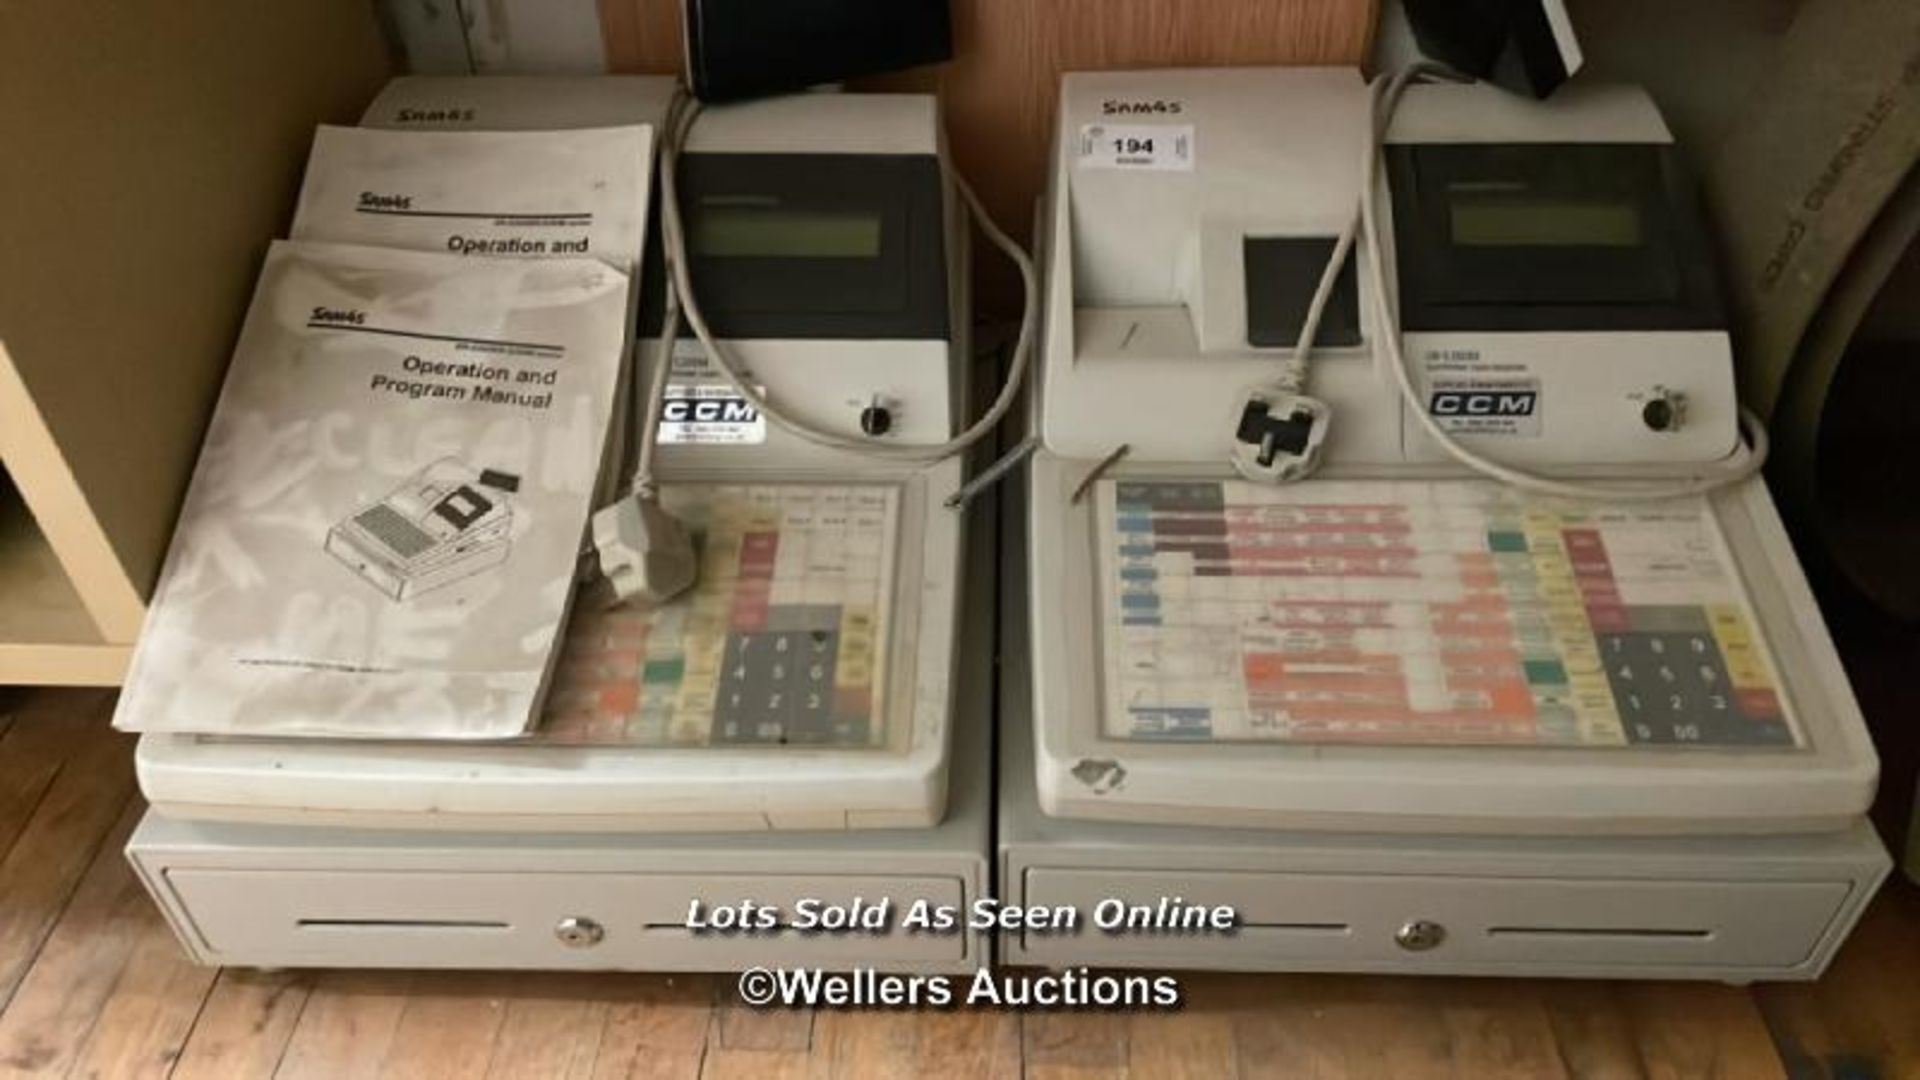 2X SAM4S ER-5200M ELECTRONIC CASH REGISTERS WITH KEYS / COLLECTION LOCATION: OLD WOKING DISTRICT